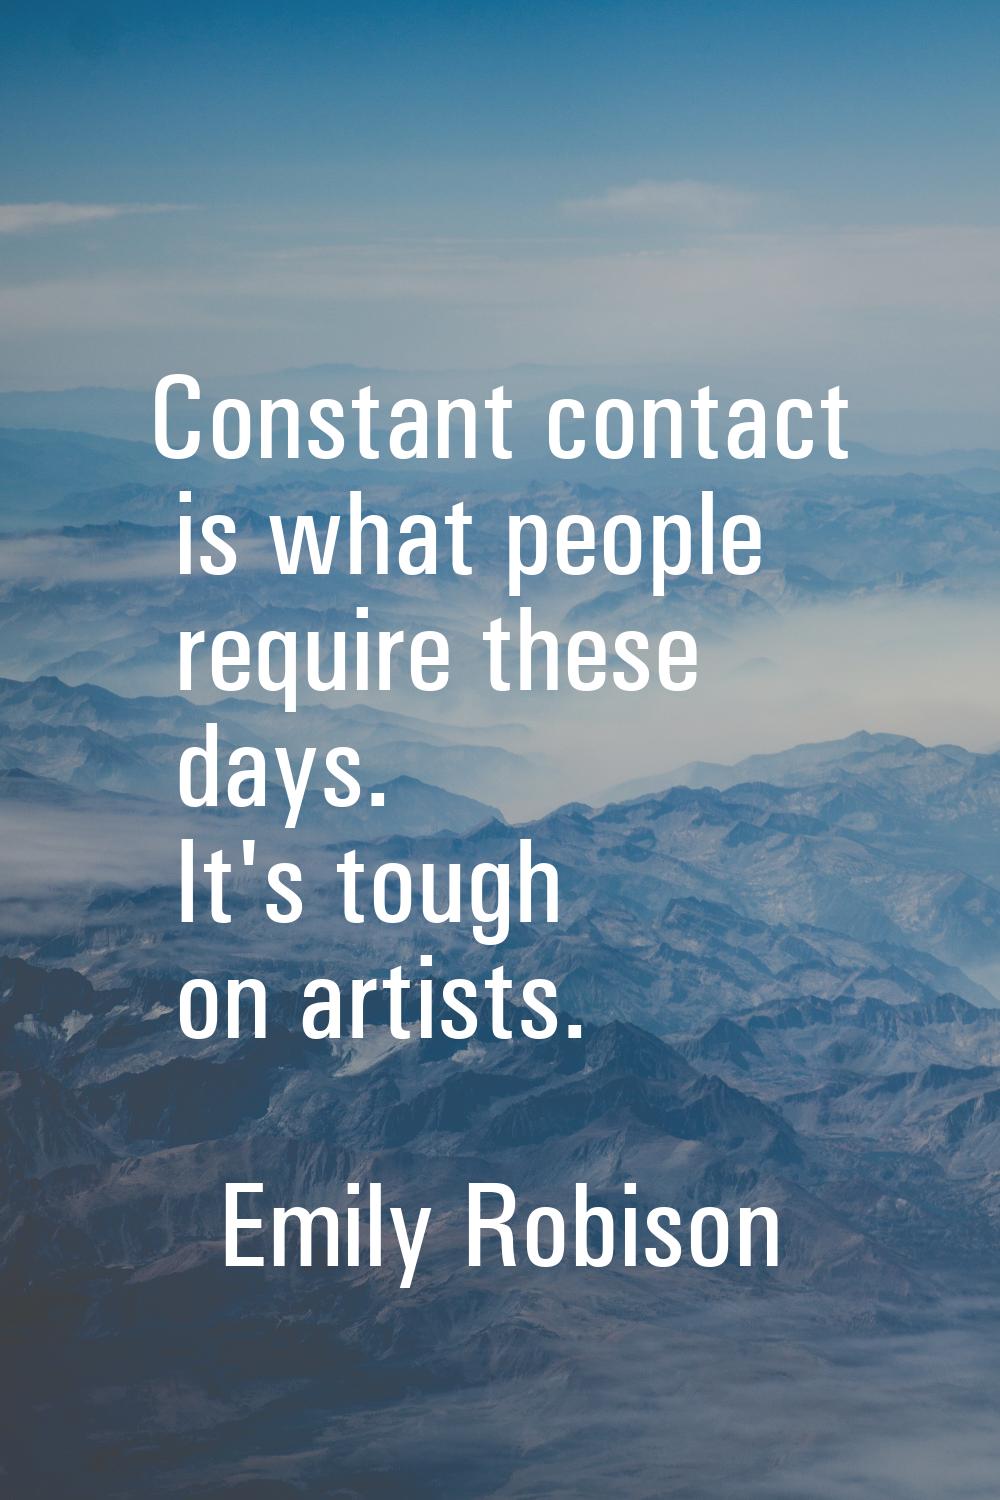 Constant contact is what people require these days. It's tough on artists.